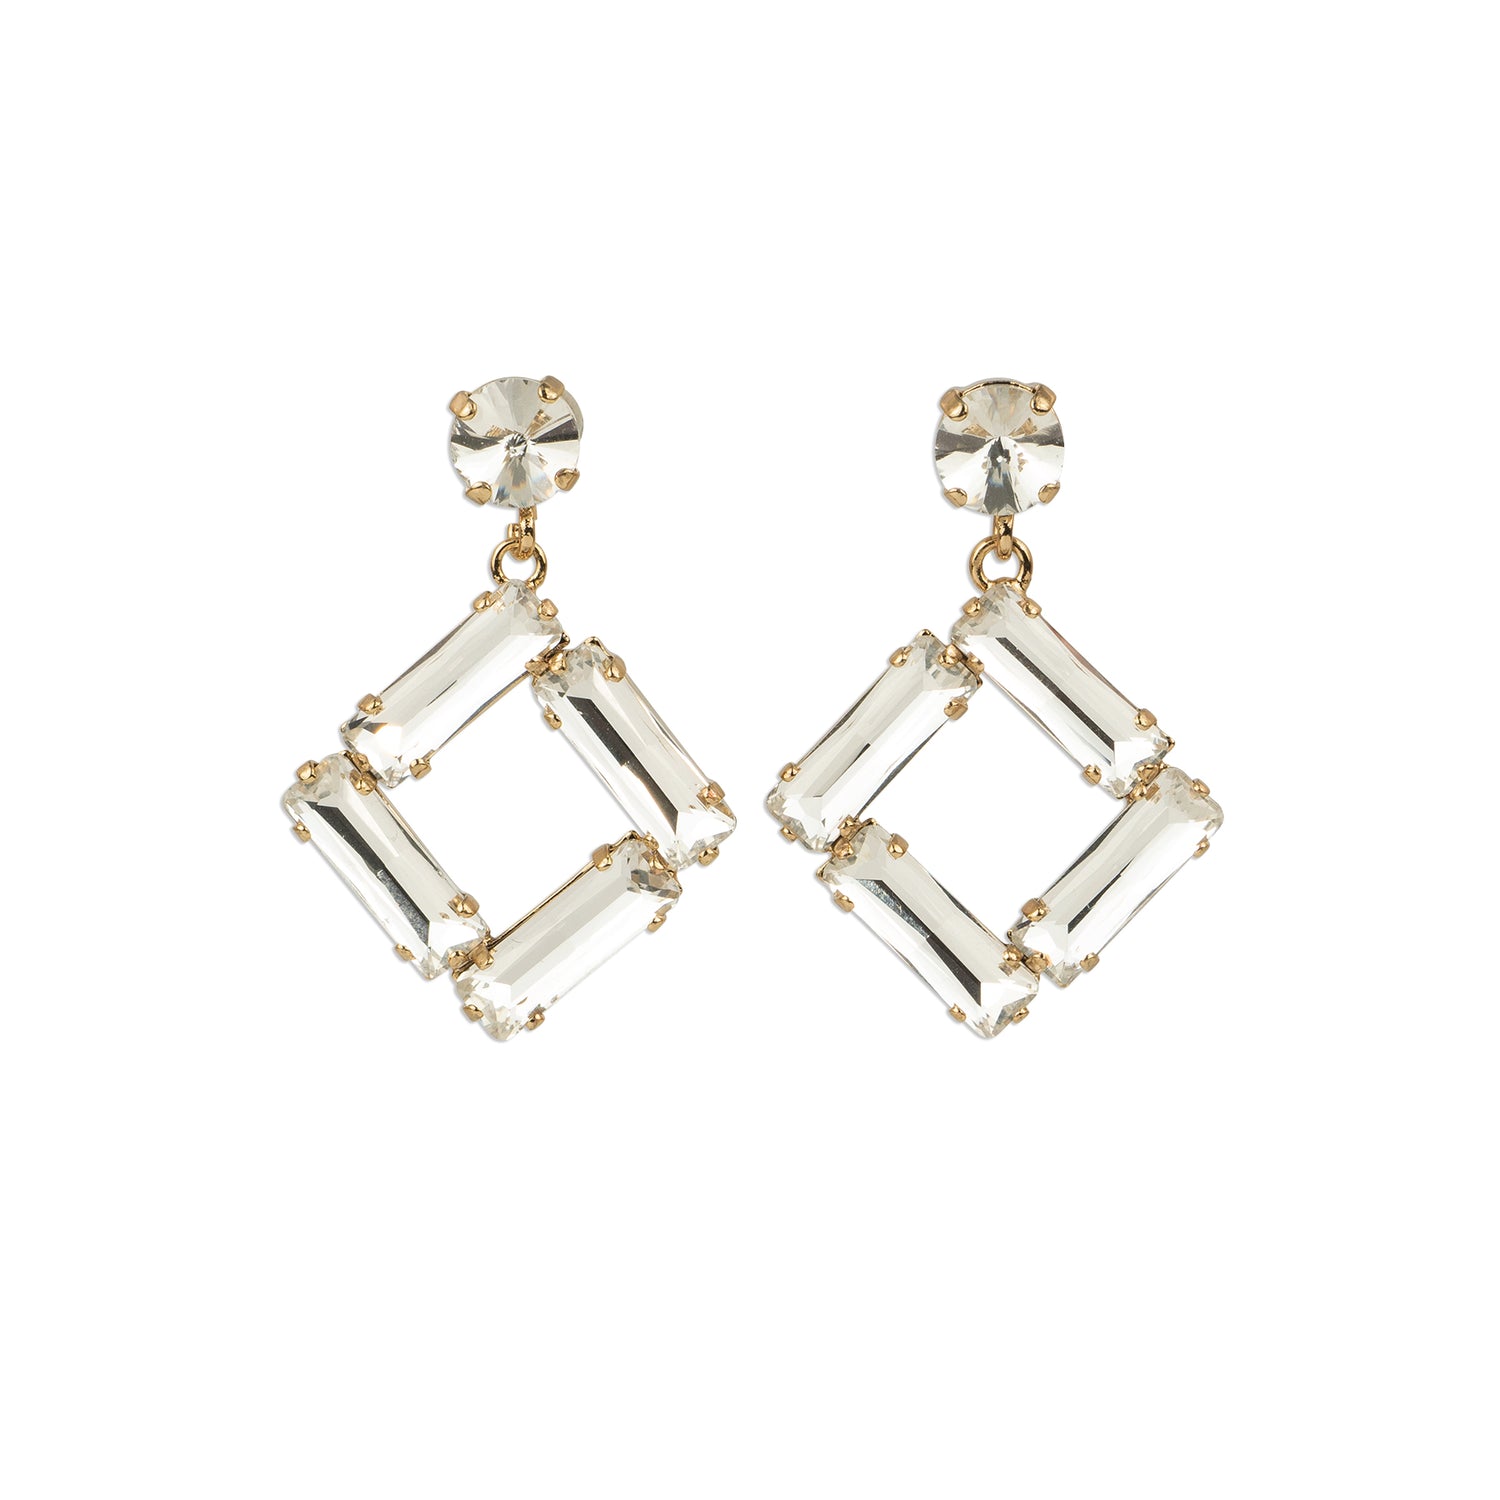 Square drop earrings with crystal baguettes